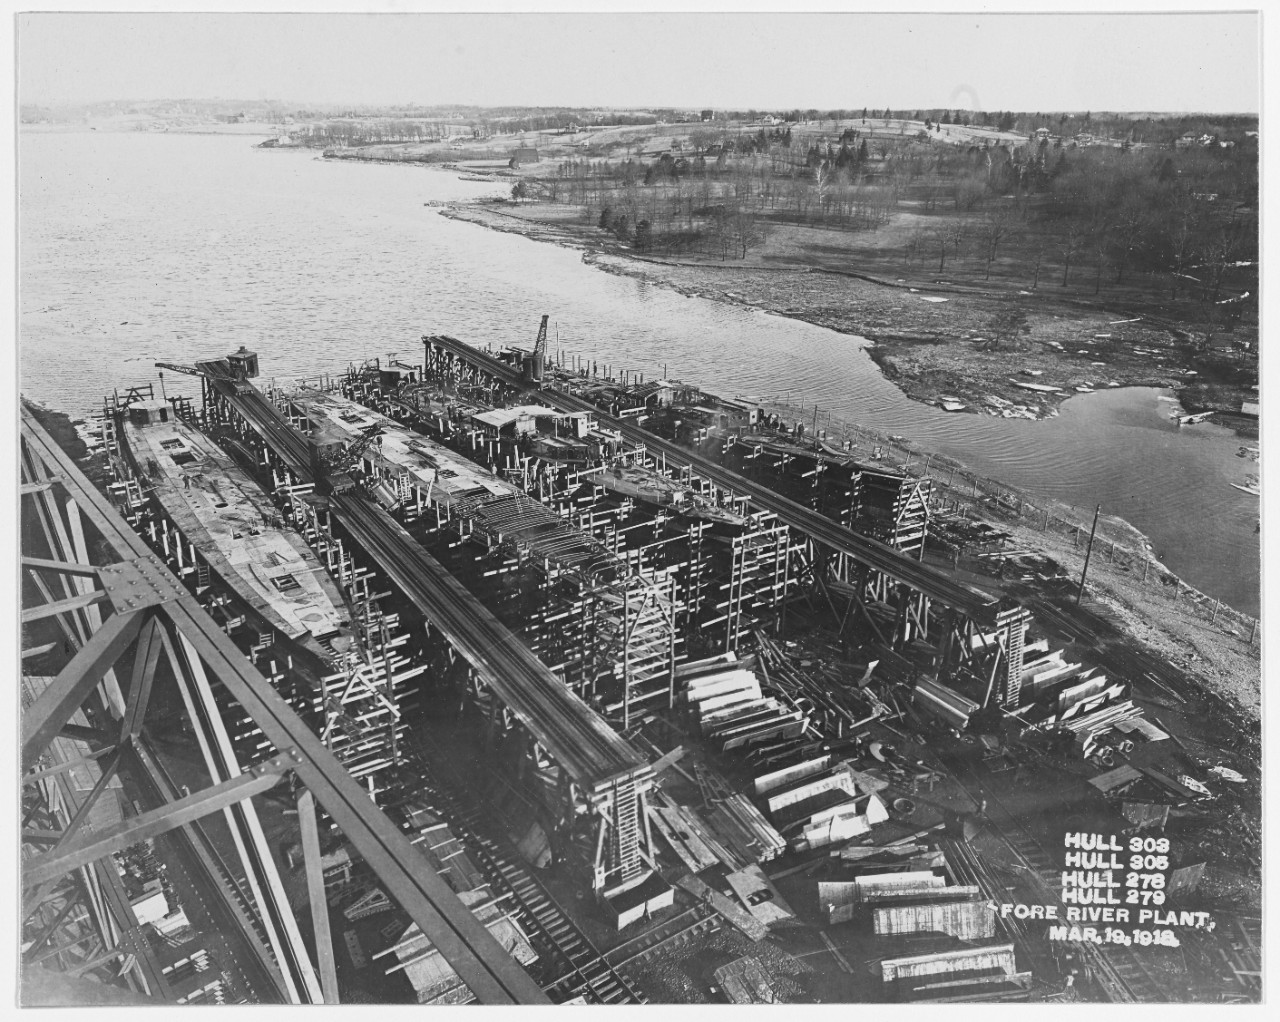 Photo #: NH 43021  Fore River Shipbuilding Company, Quincy, Massachusetts